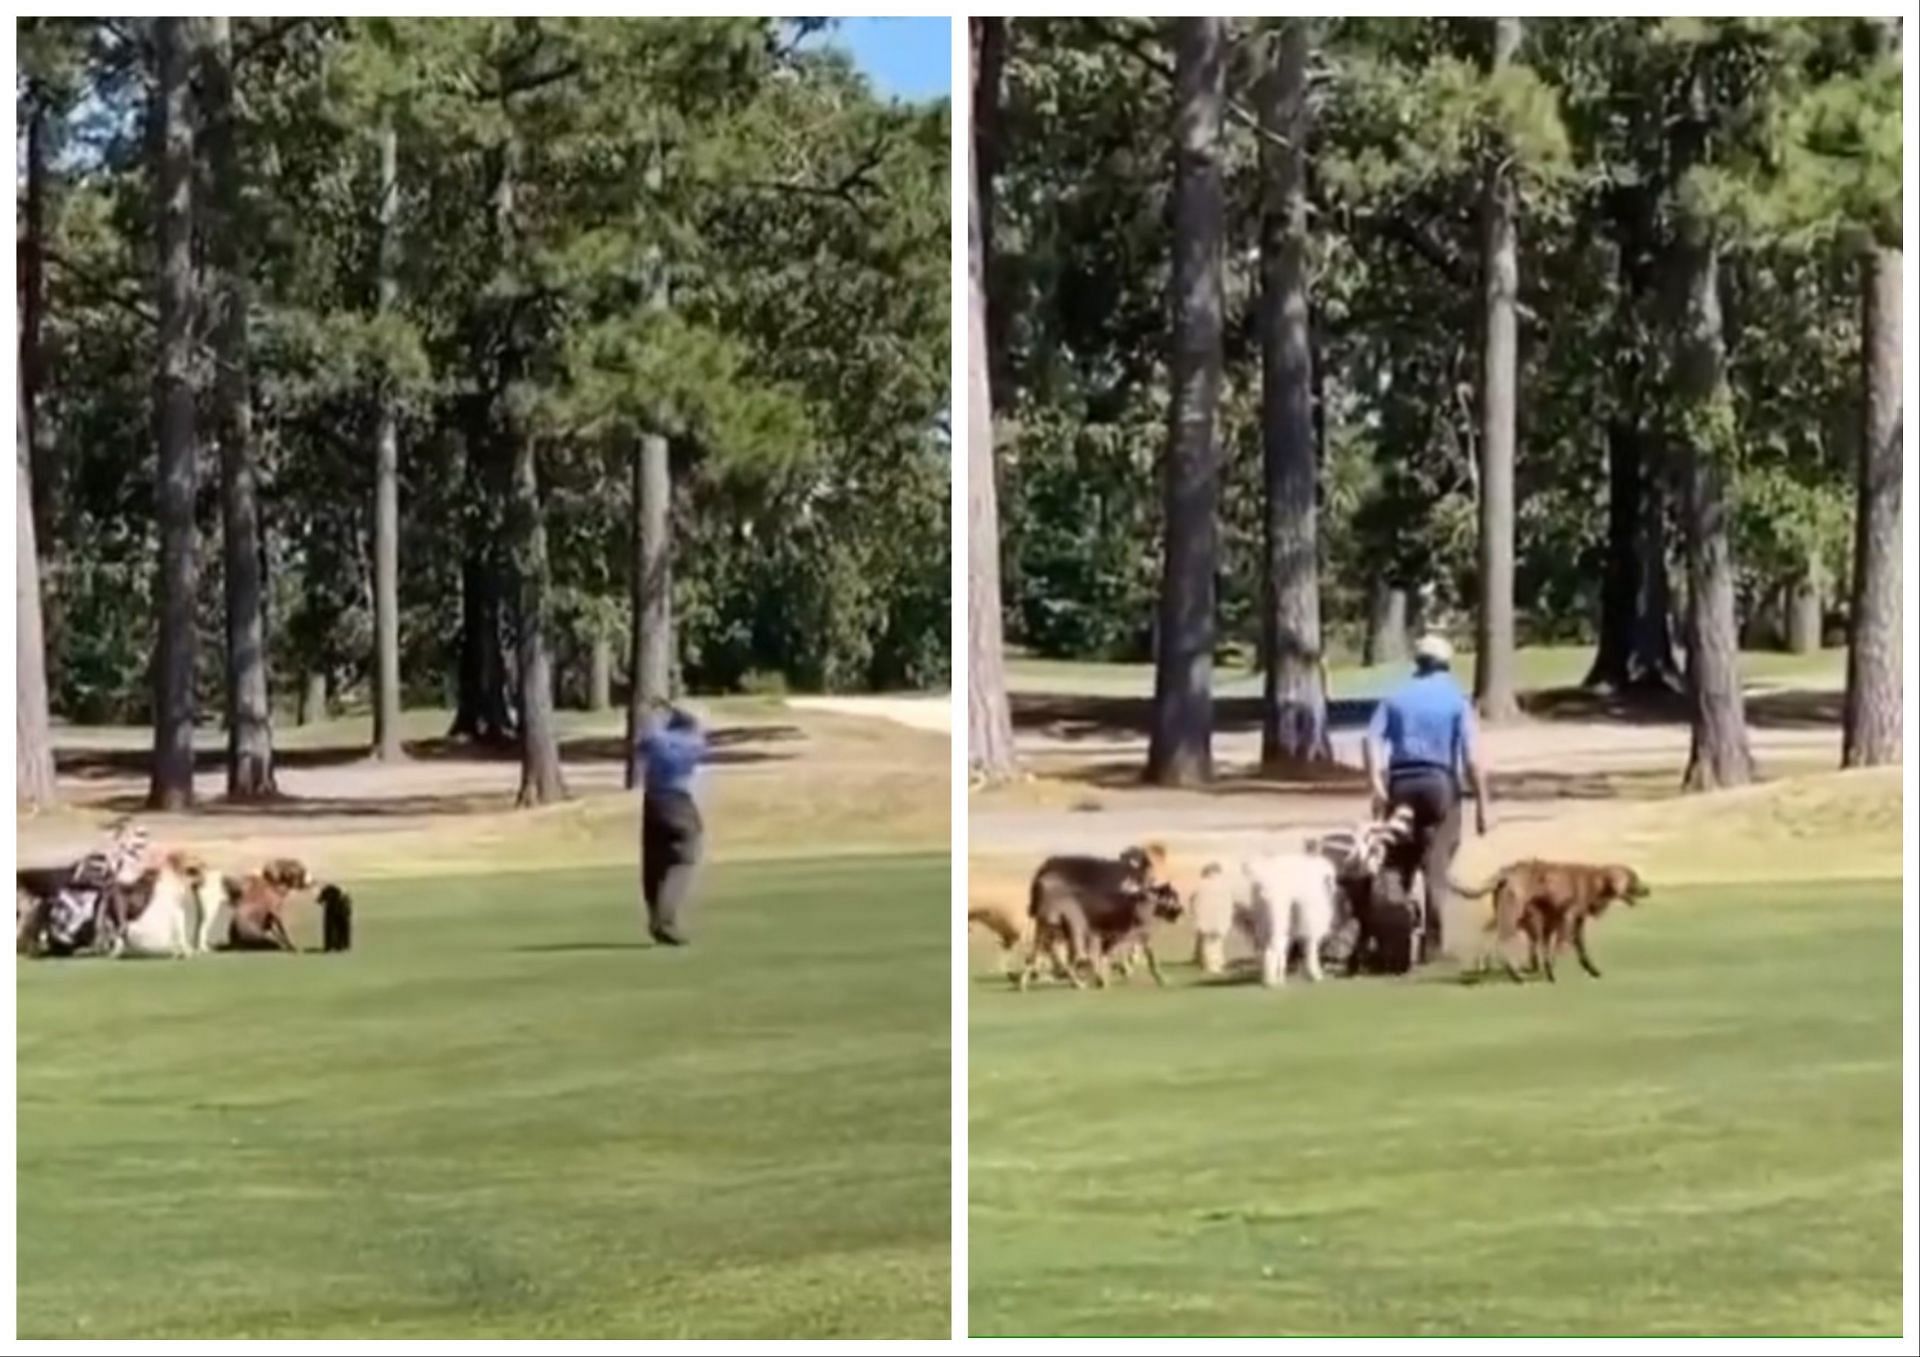 A man was seen playing the round of golf while his dogs watching him and then following him on the course